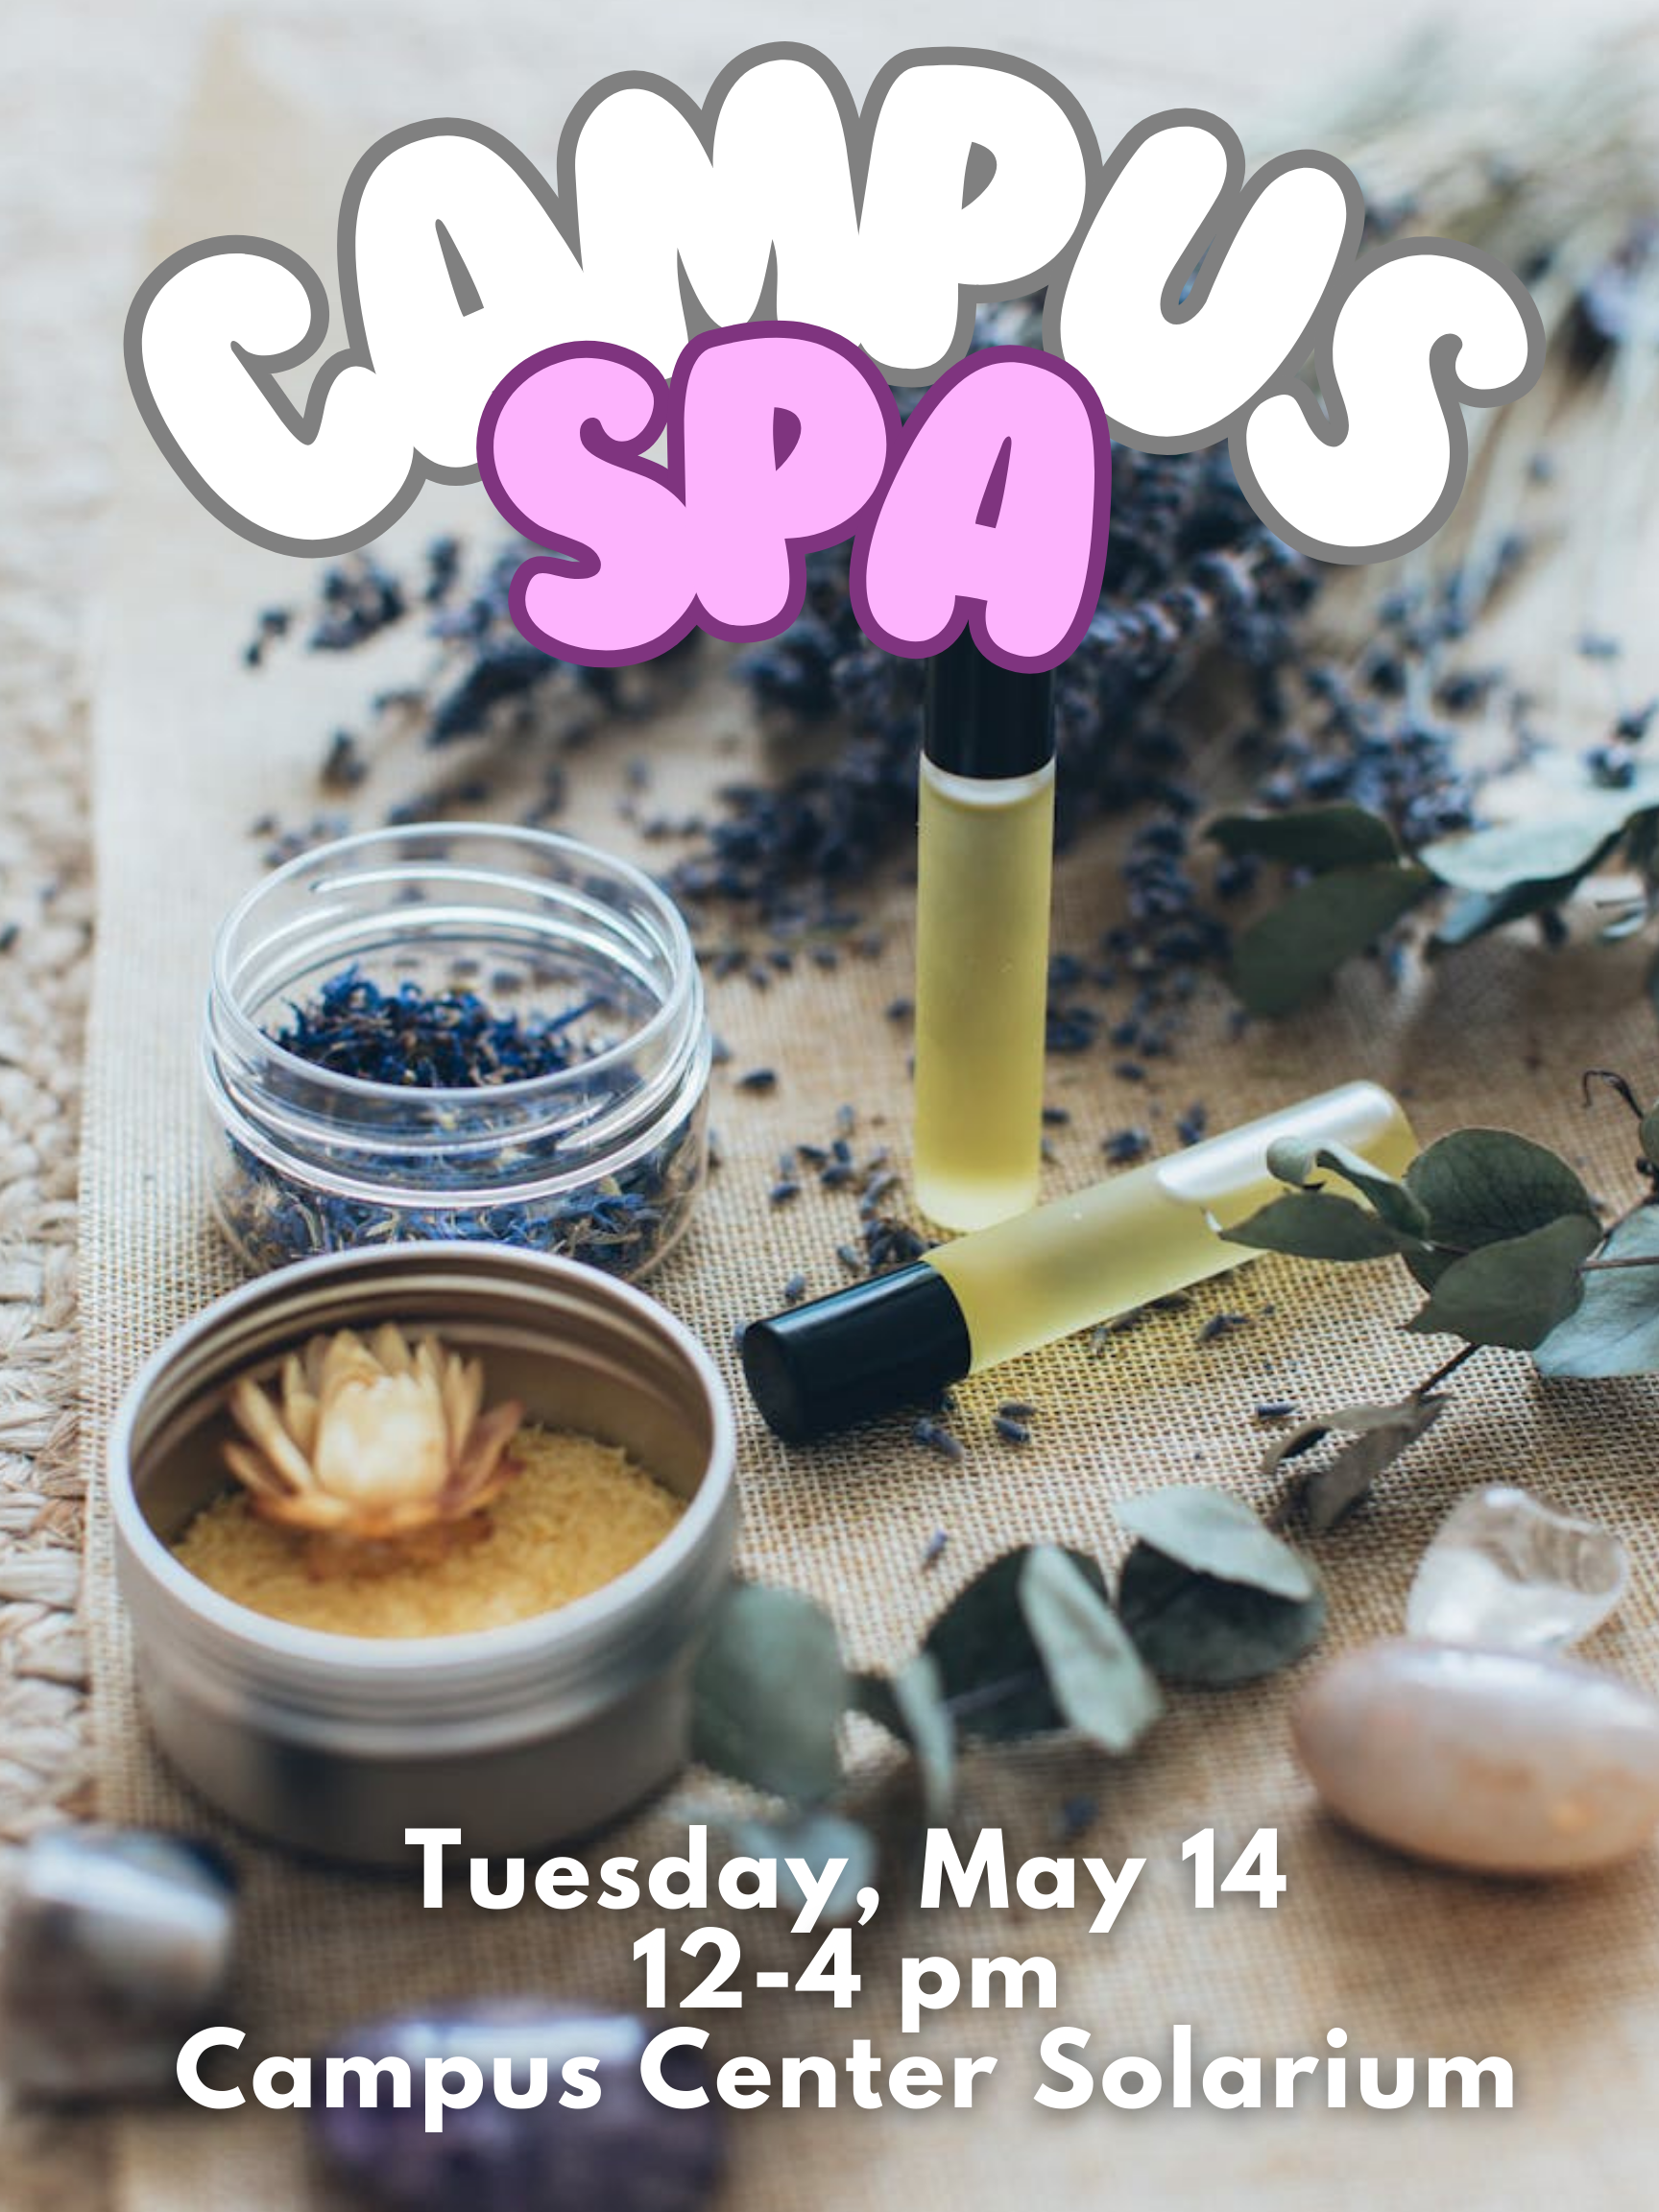 Campus Spa!

Tuesday, May 14th

12 pm - 4 pm

Campus Center Solarium On Image containing essential oils and lotion